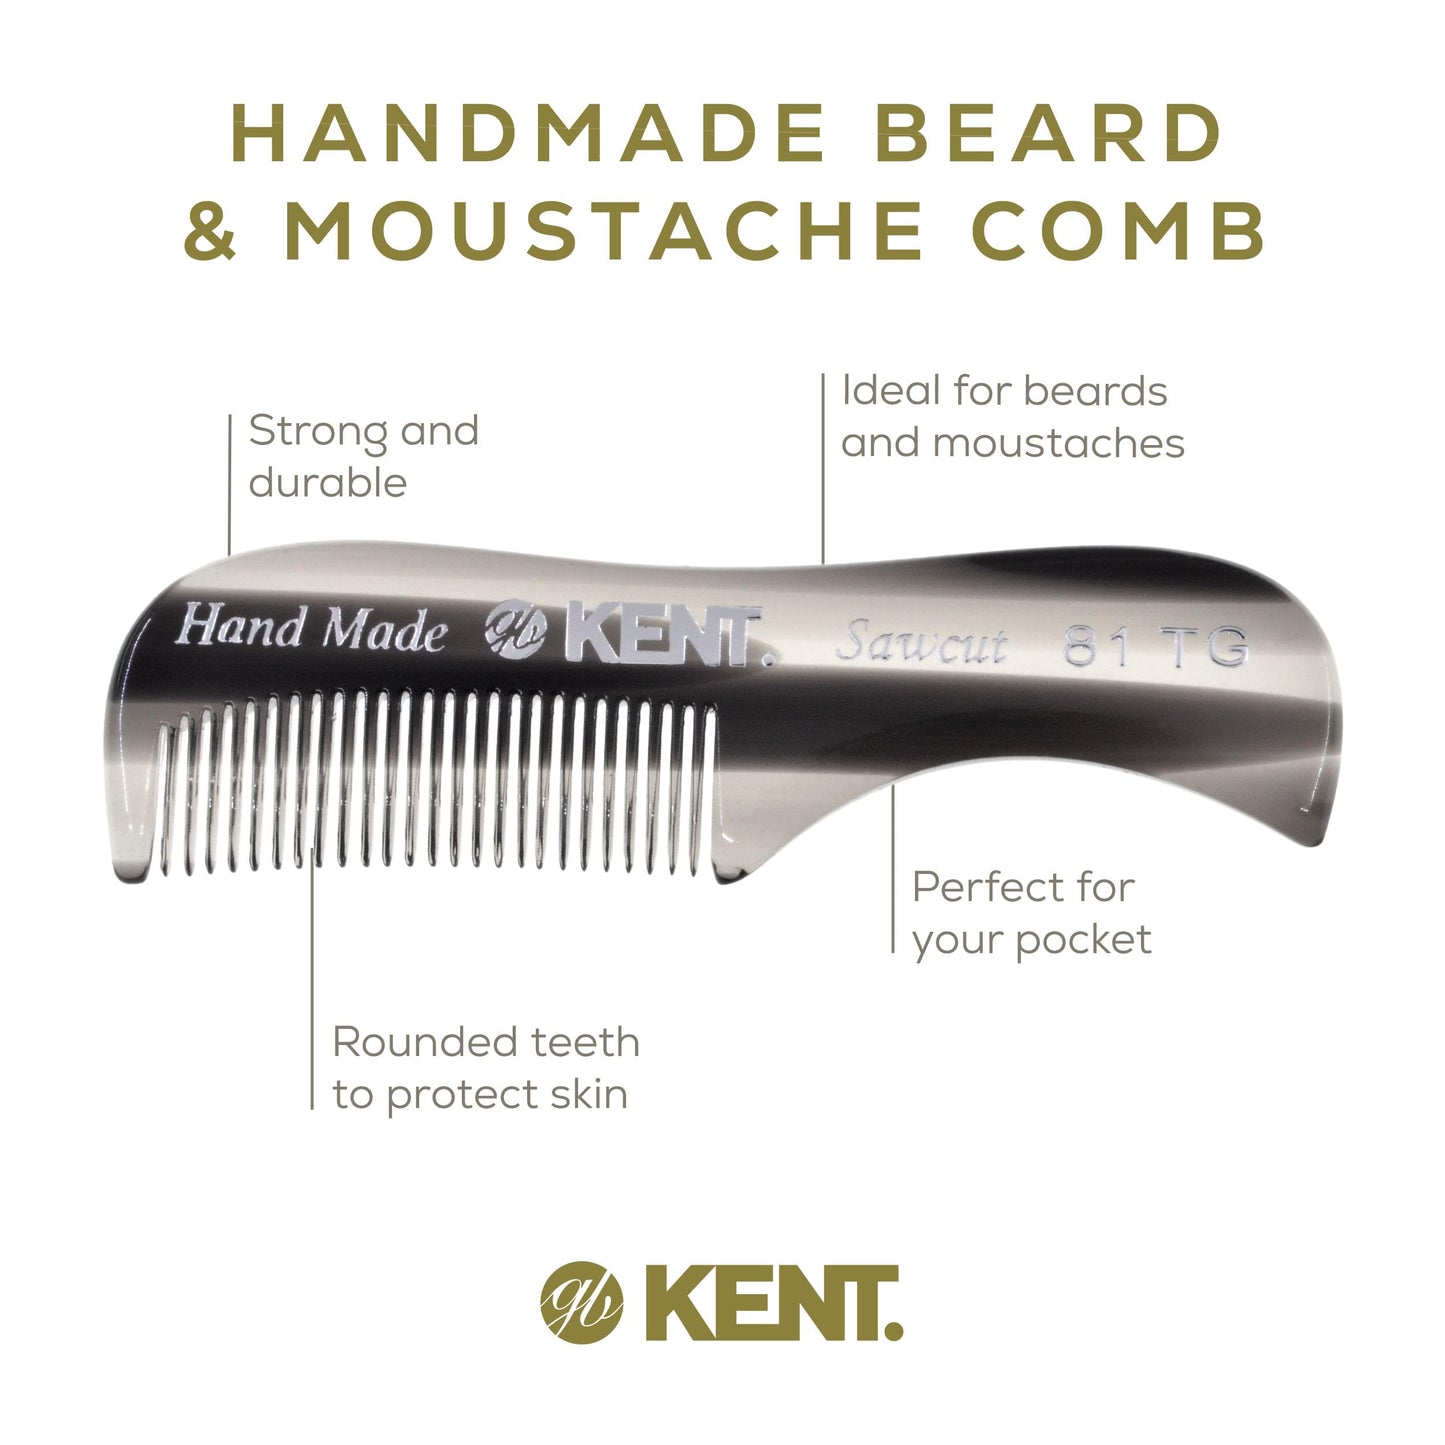 Kent A 81T Graphite X-Small Men's Beard Mustache Pocket Comb, Fine Toothed Pocket for Facial Hair Grooming and Styling. Hand-Made of Quality Cellulose Acetate, Saw-cut Hand Polished. Made in England